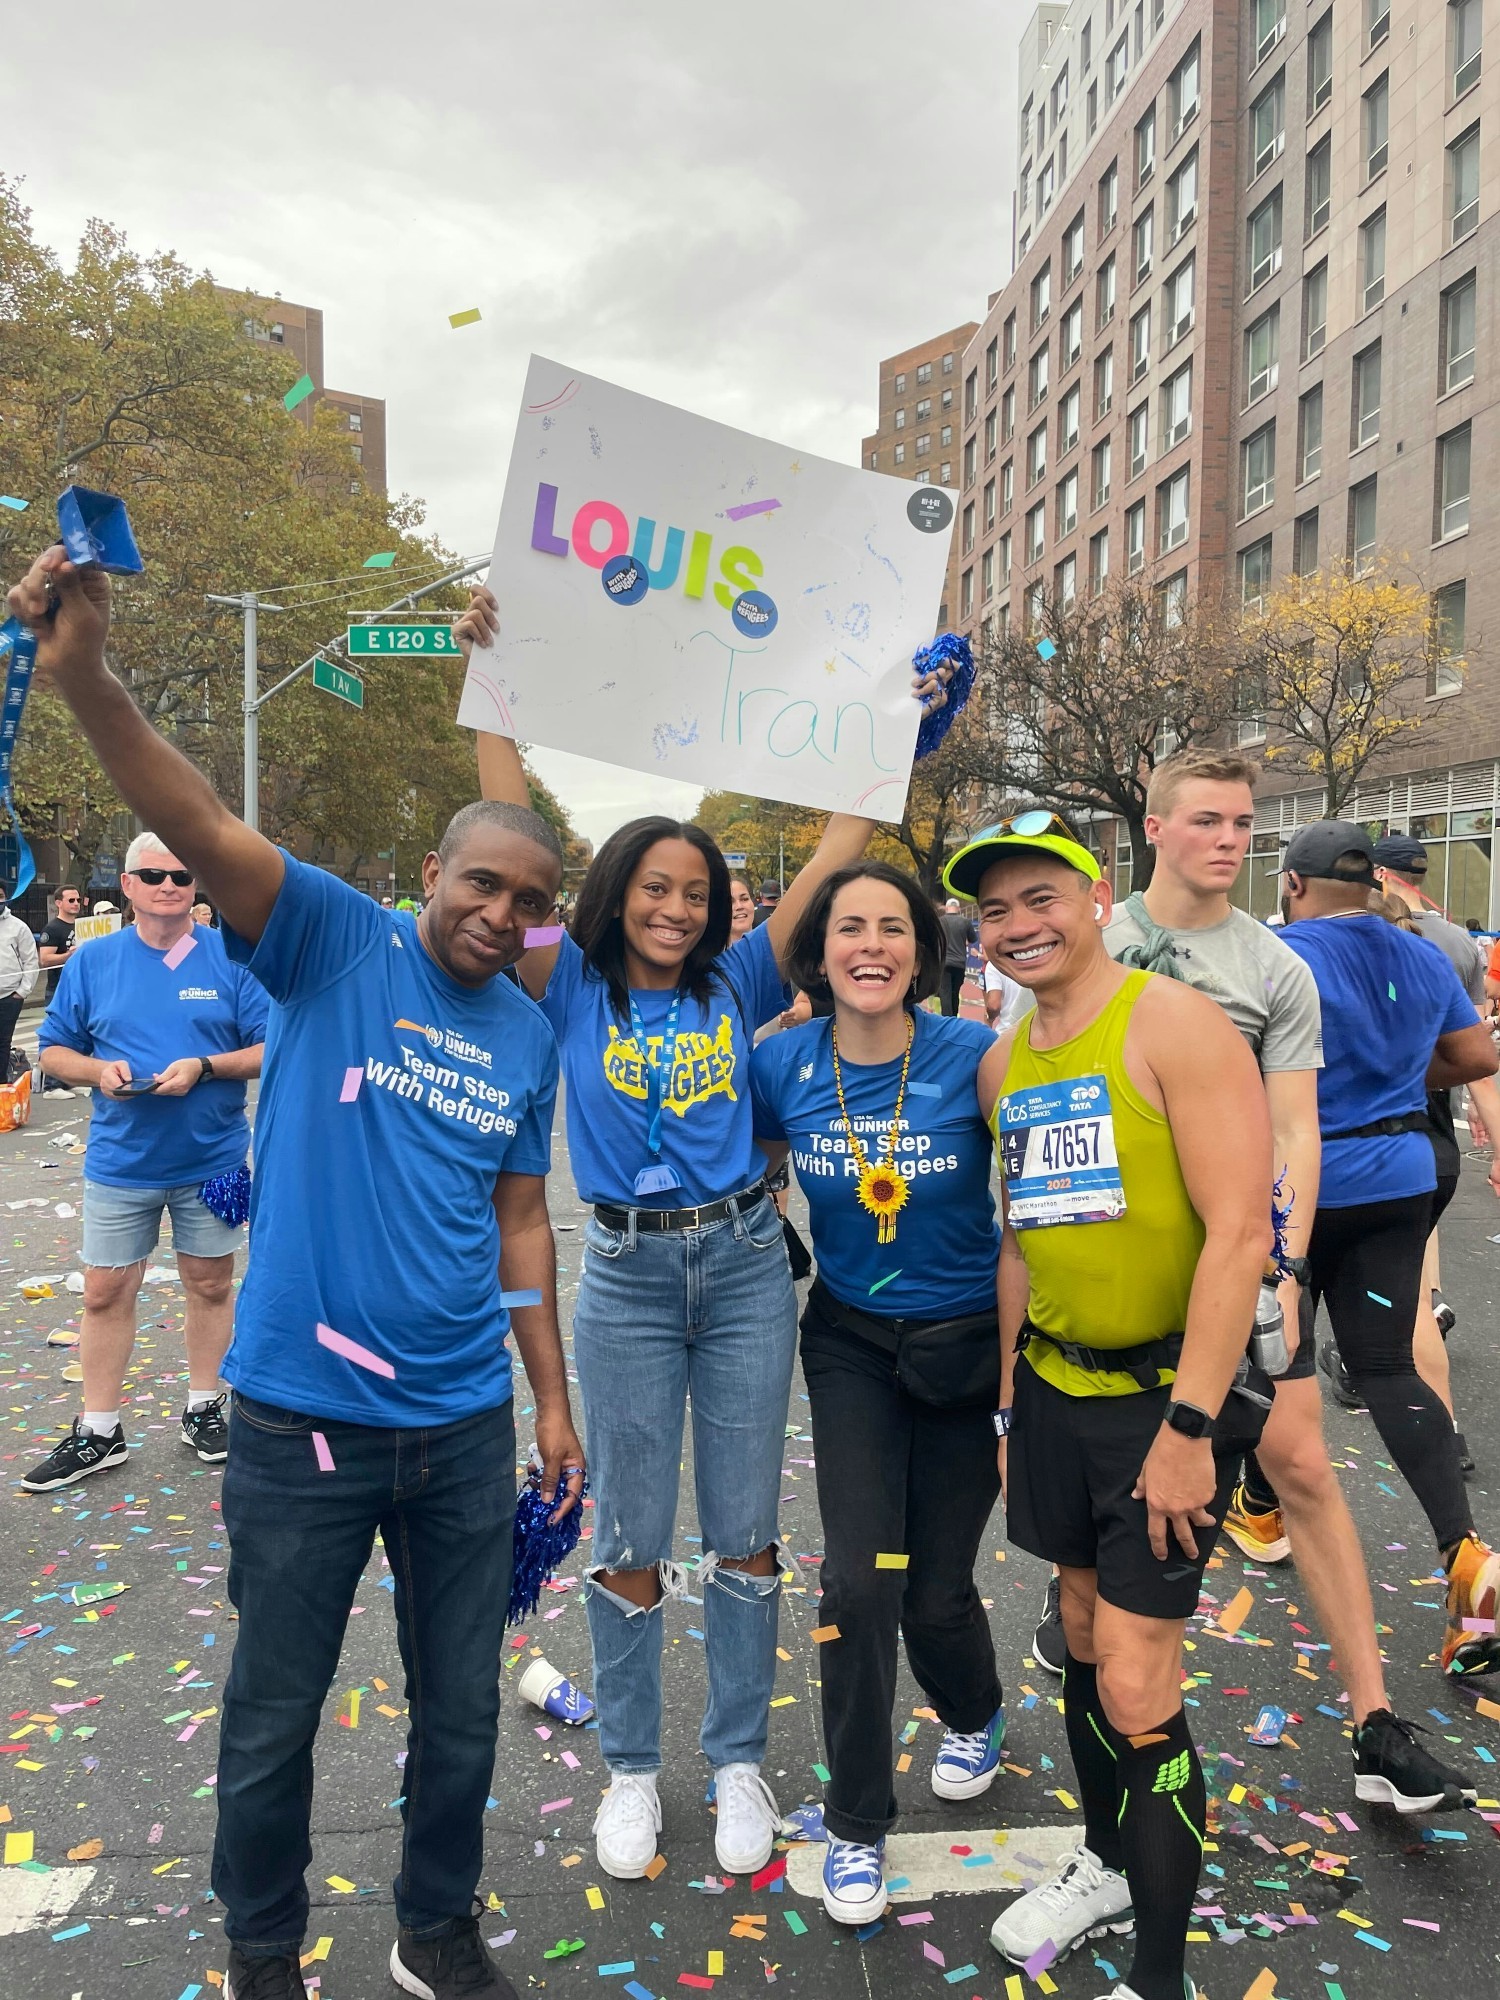 Some of our team members at the NYC Marathon, with resettled refugee, Louis Tran.